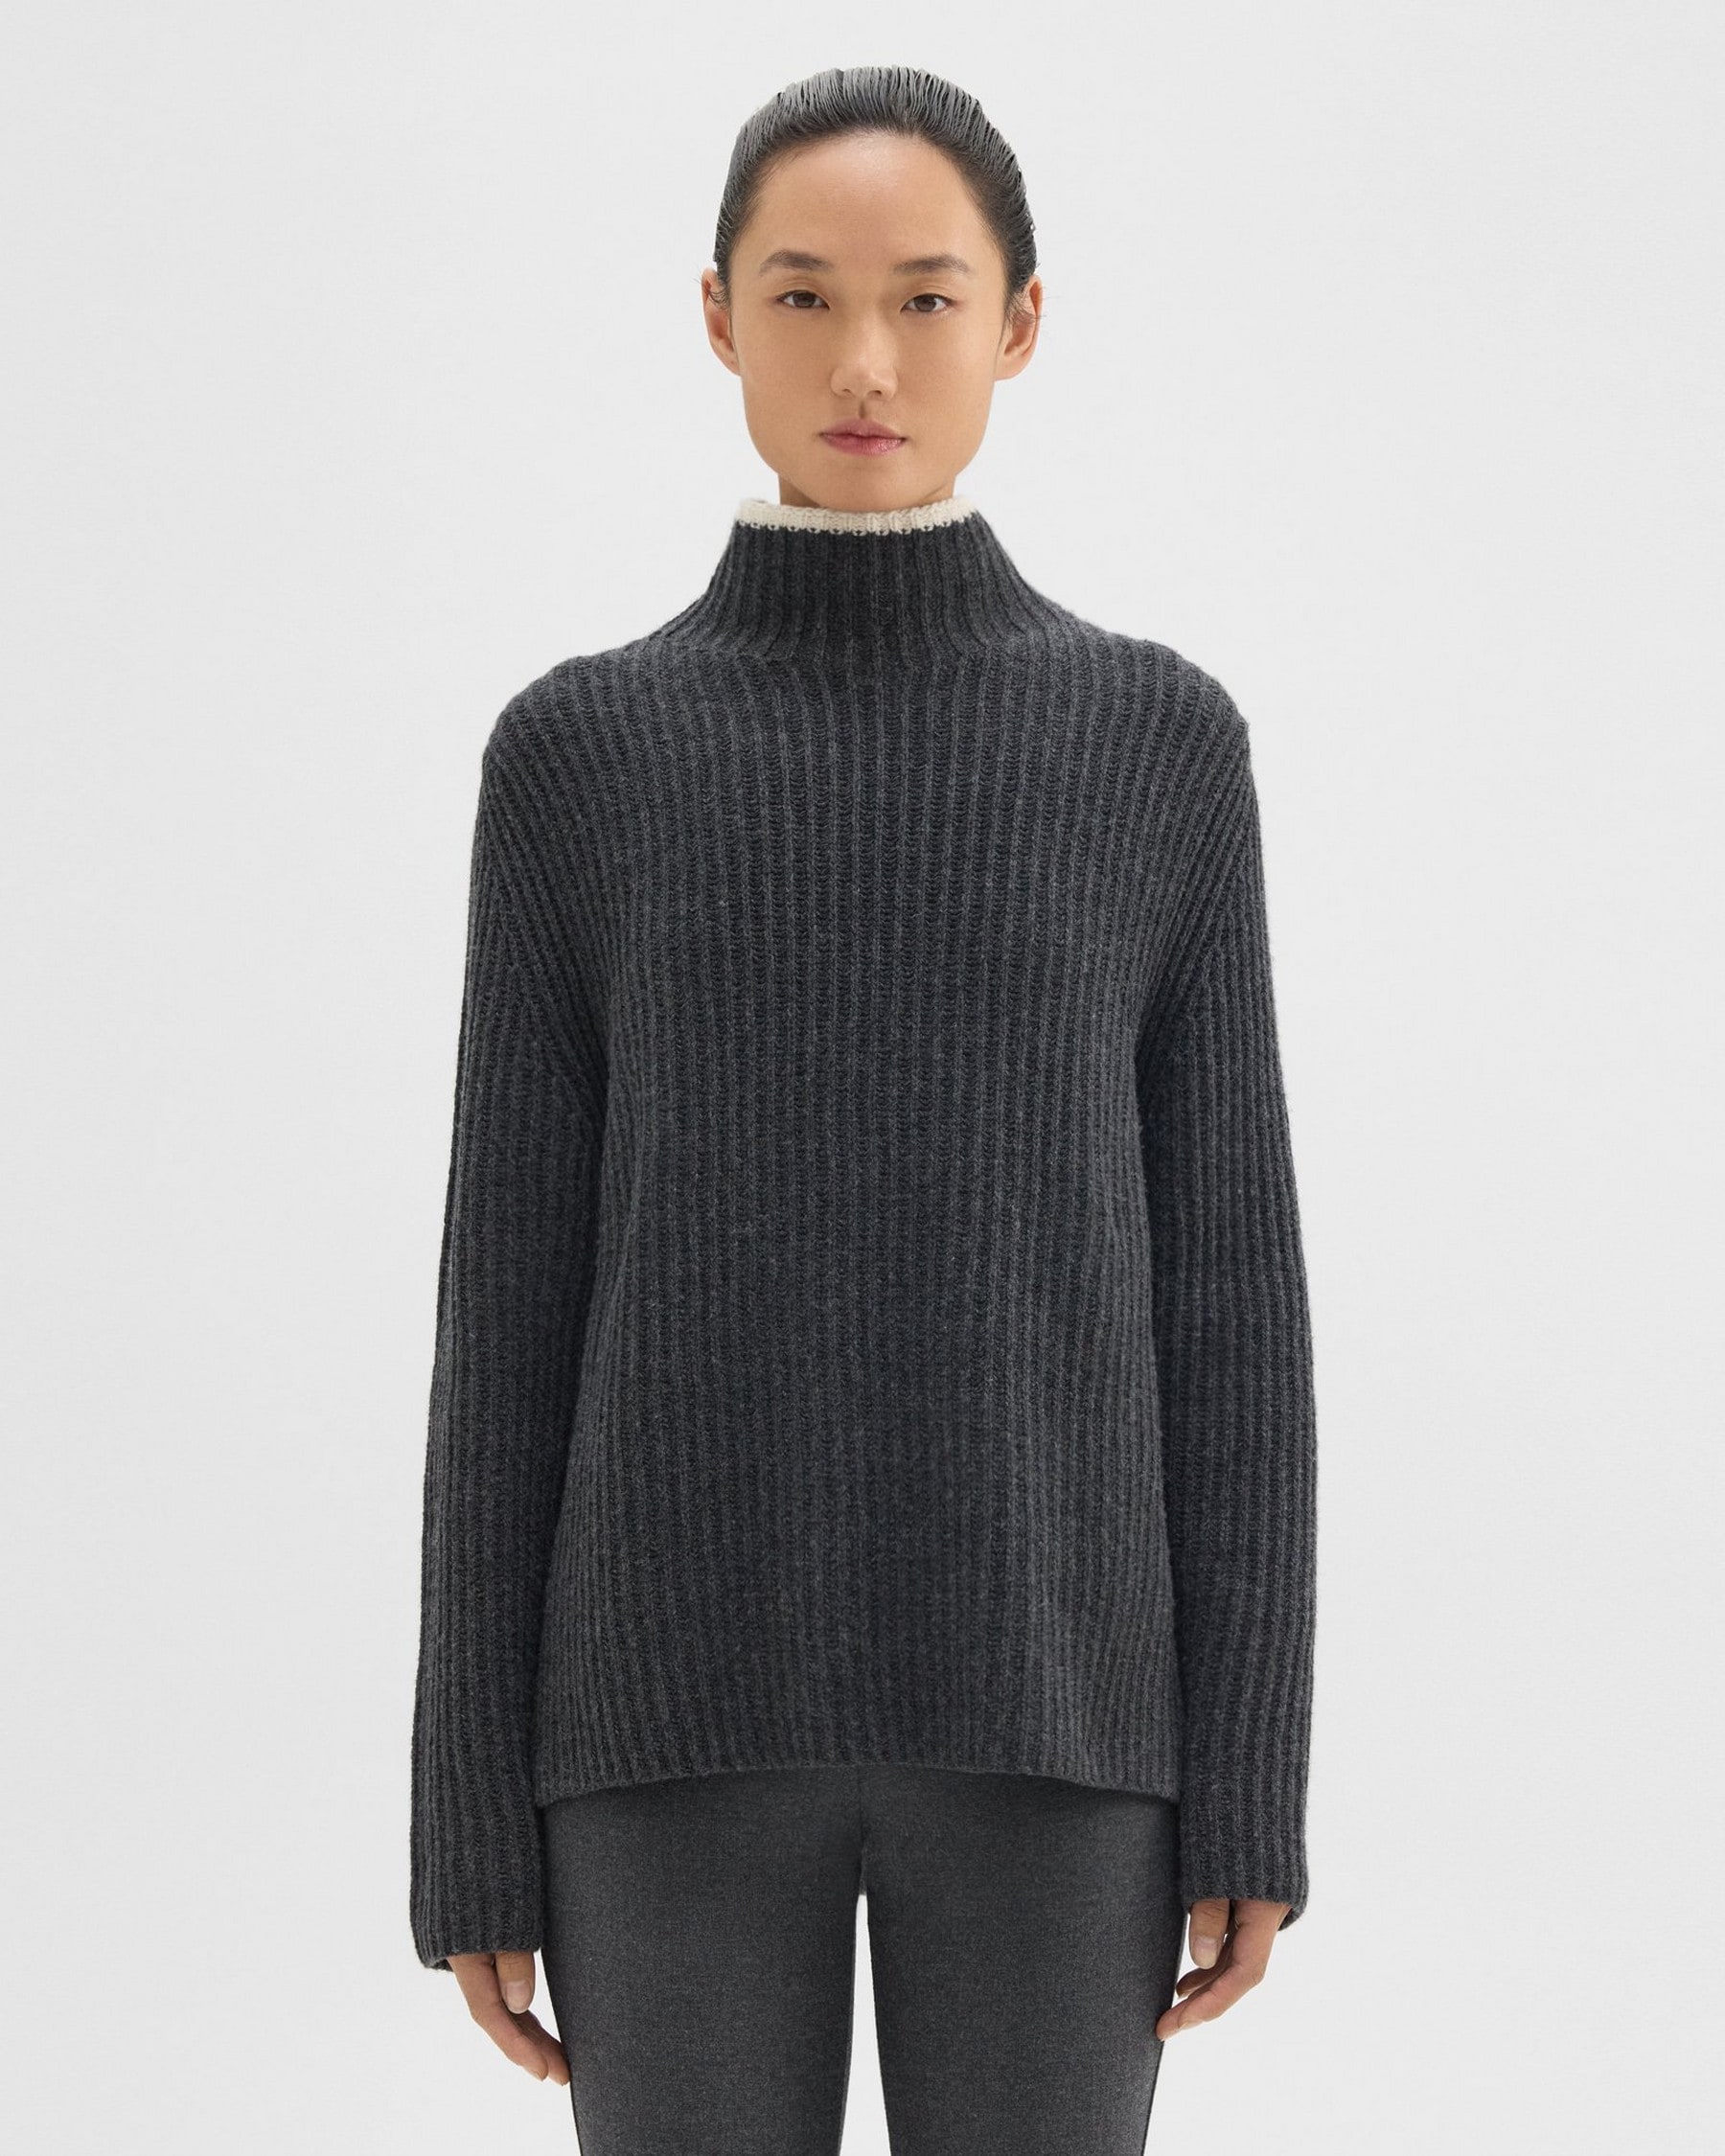 Theory Karenia Turtleneck Sweater in Felted Wool-Cashmere